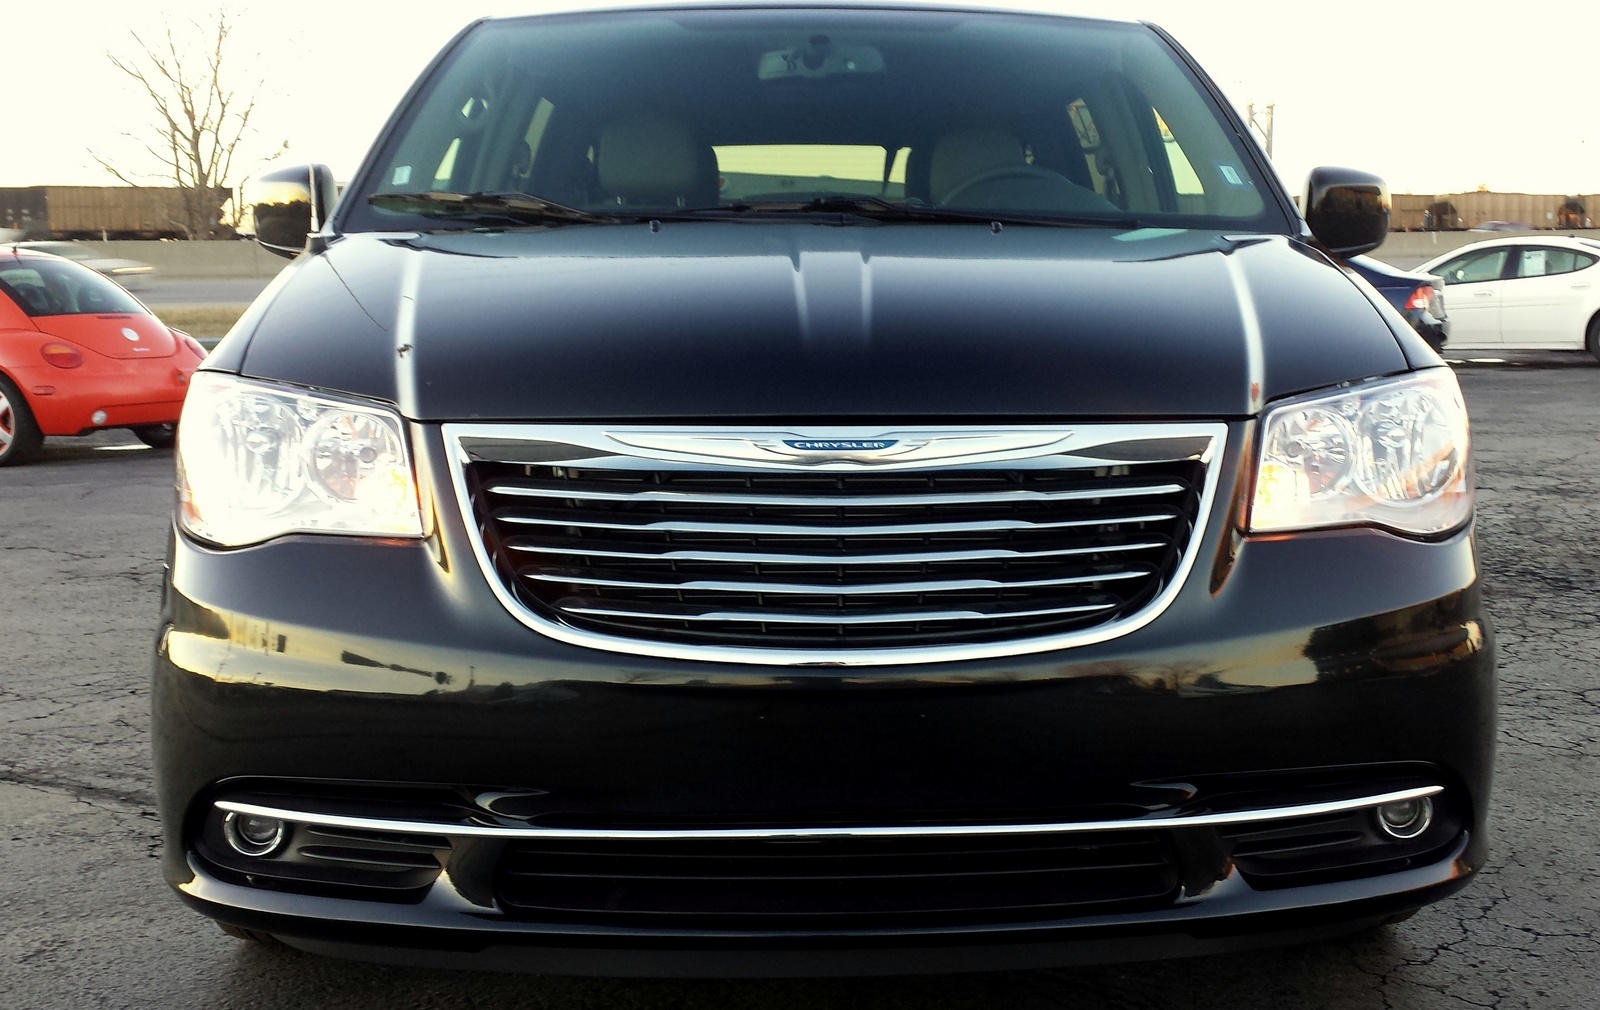 2005 Chrysler town and country review #5